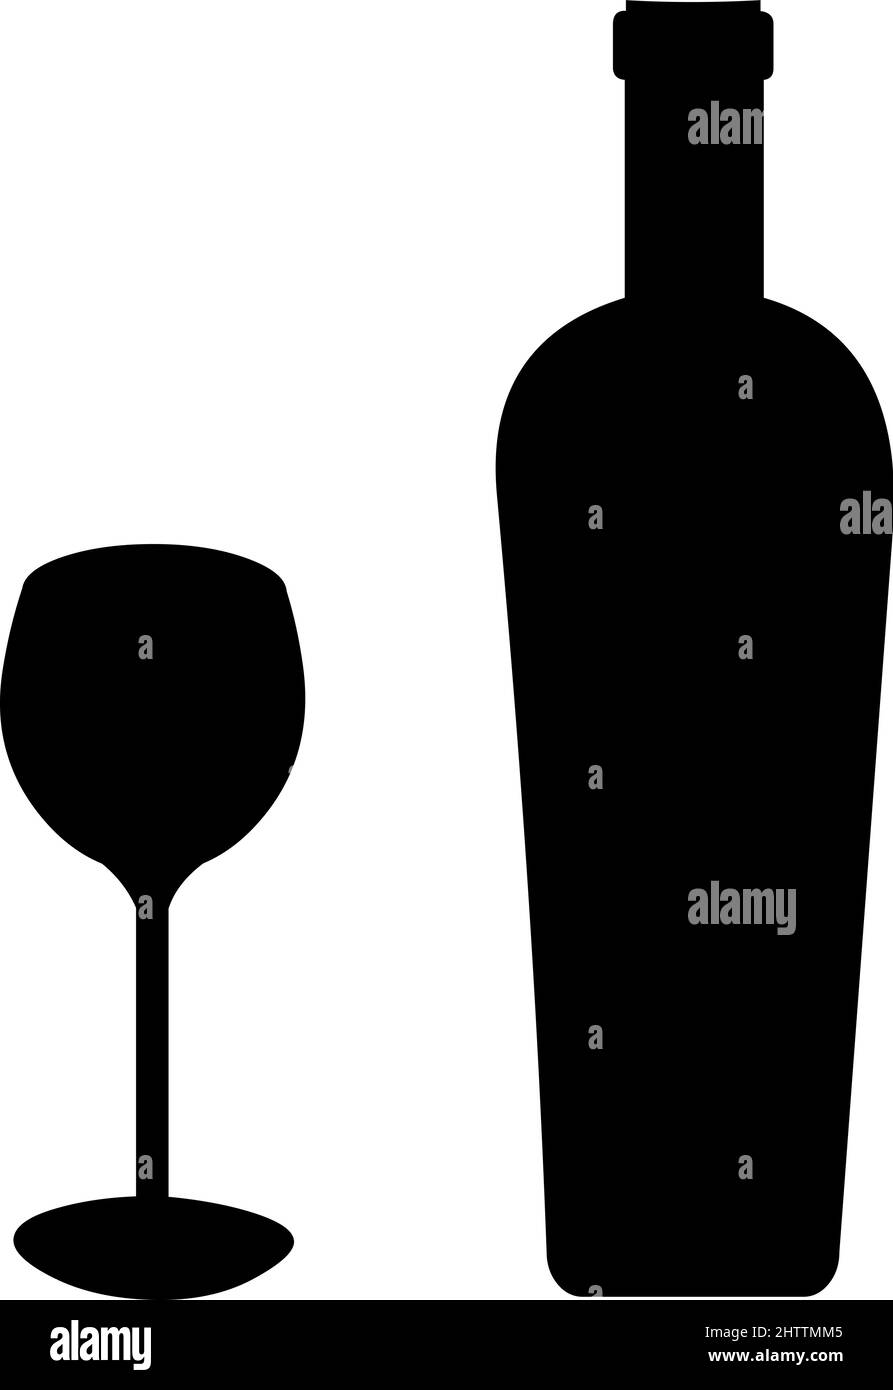 Vector illustration of the black silhouette of a bottle and a glass of wine Stock Vector